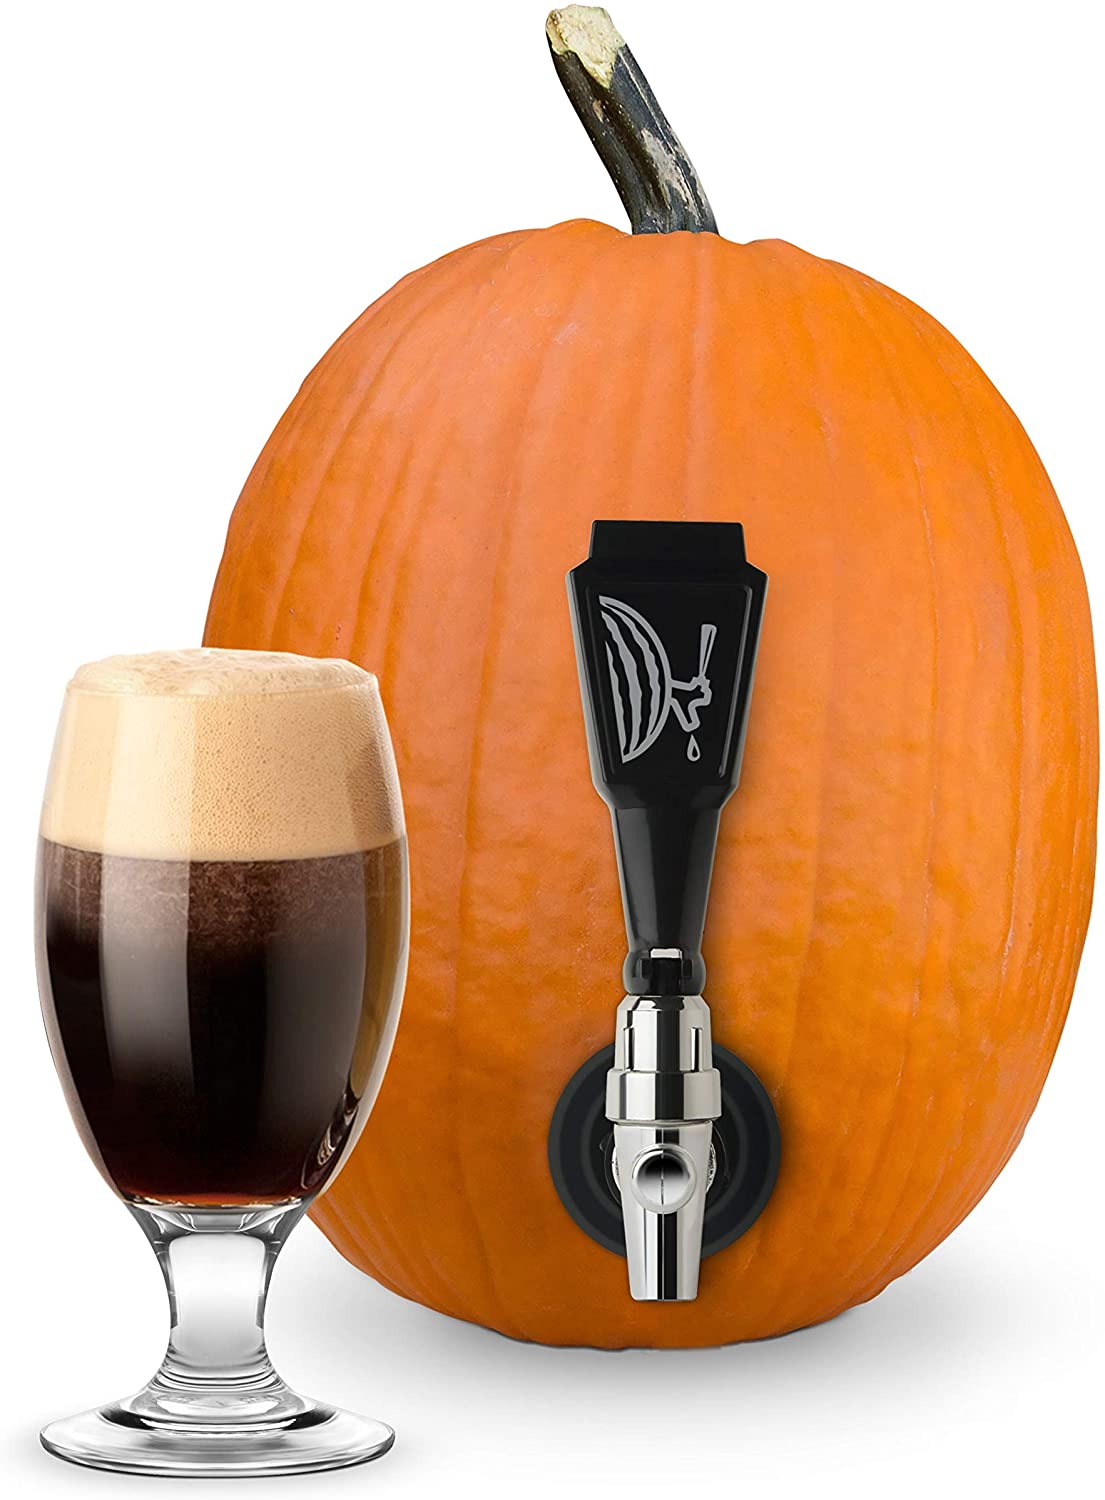 the tapping kit displayed in a pumpkin with a drink beside it on a white background